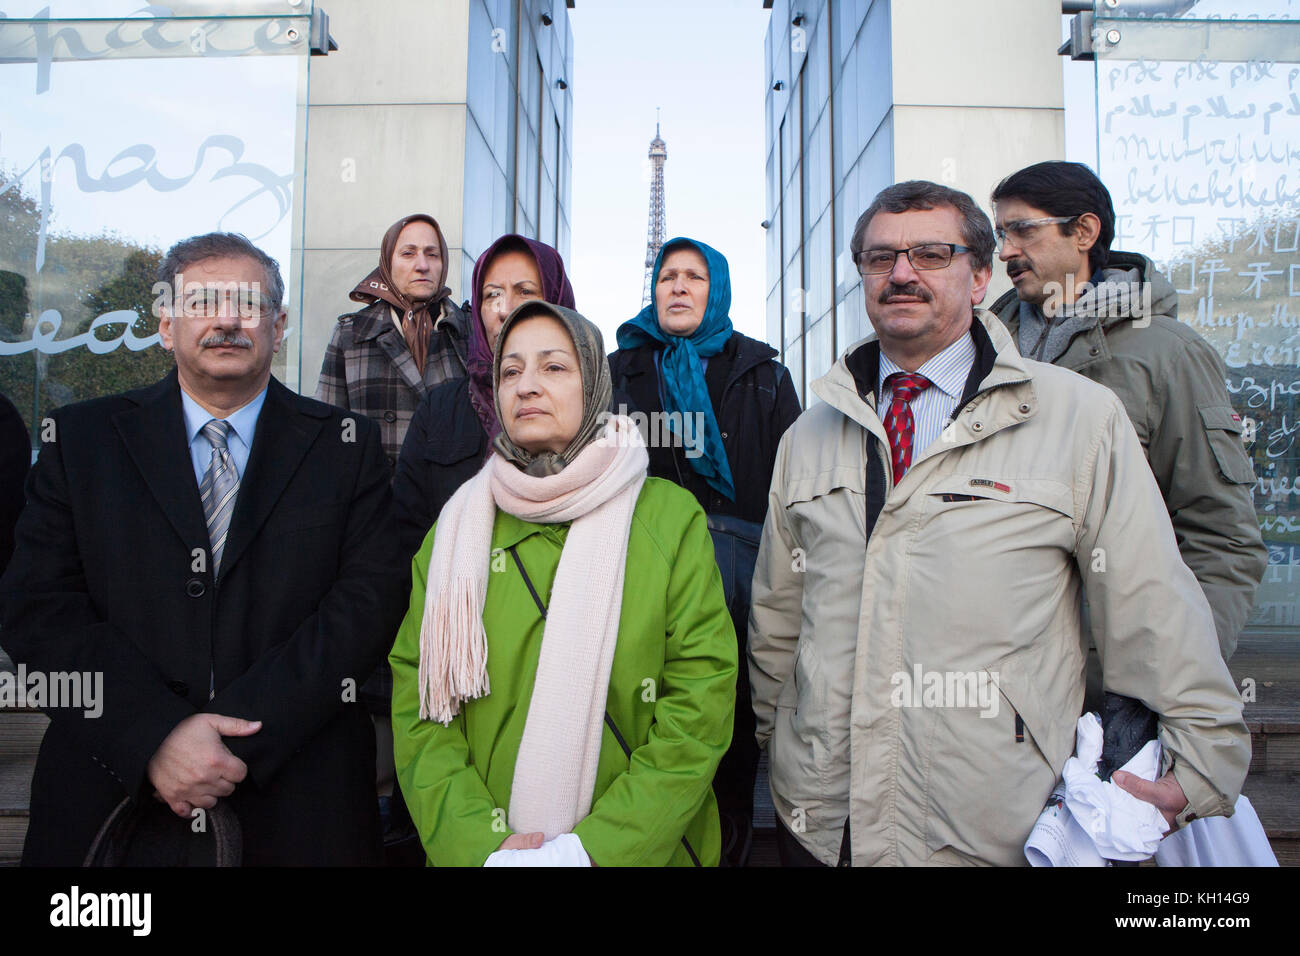 Paris, France. 13th Nov, 2017. Muslims honor the victims of the terrorist attacks in Paris on November 13, 2015. The Wall for Peace at the Champ de Mars in Paris. Representatives of the Iranian resistance express their solidarity with the French people. Credit: Siavosh Hosseini/Alamy Live News Stock Photo